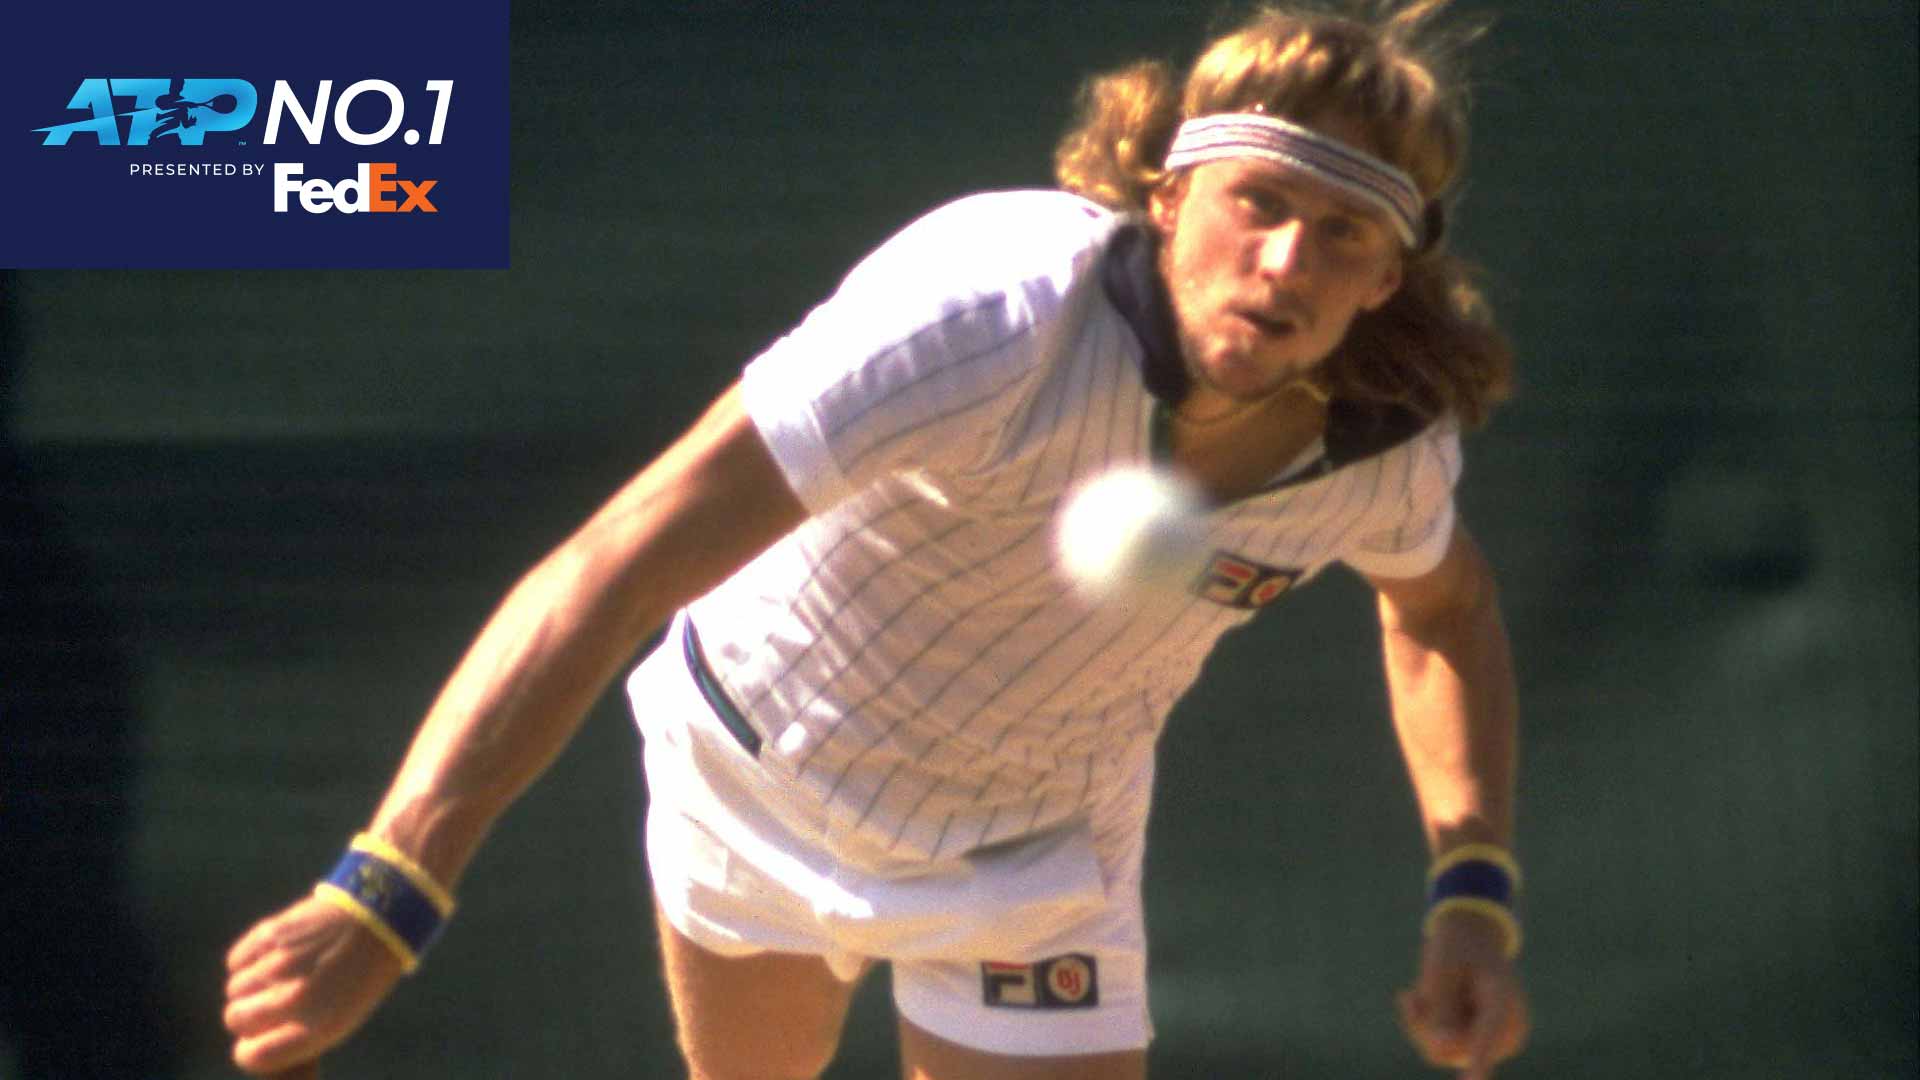 Sweden's Bjorn Borg was the fourth player in the history of the FedEx ATP Rankings to rise to No. 1 on 23 August 1977.